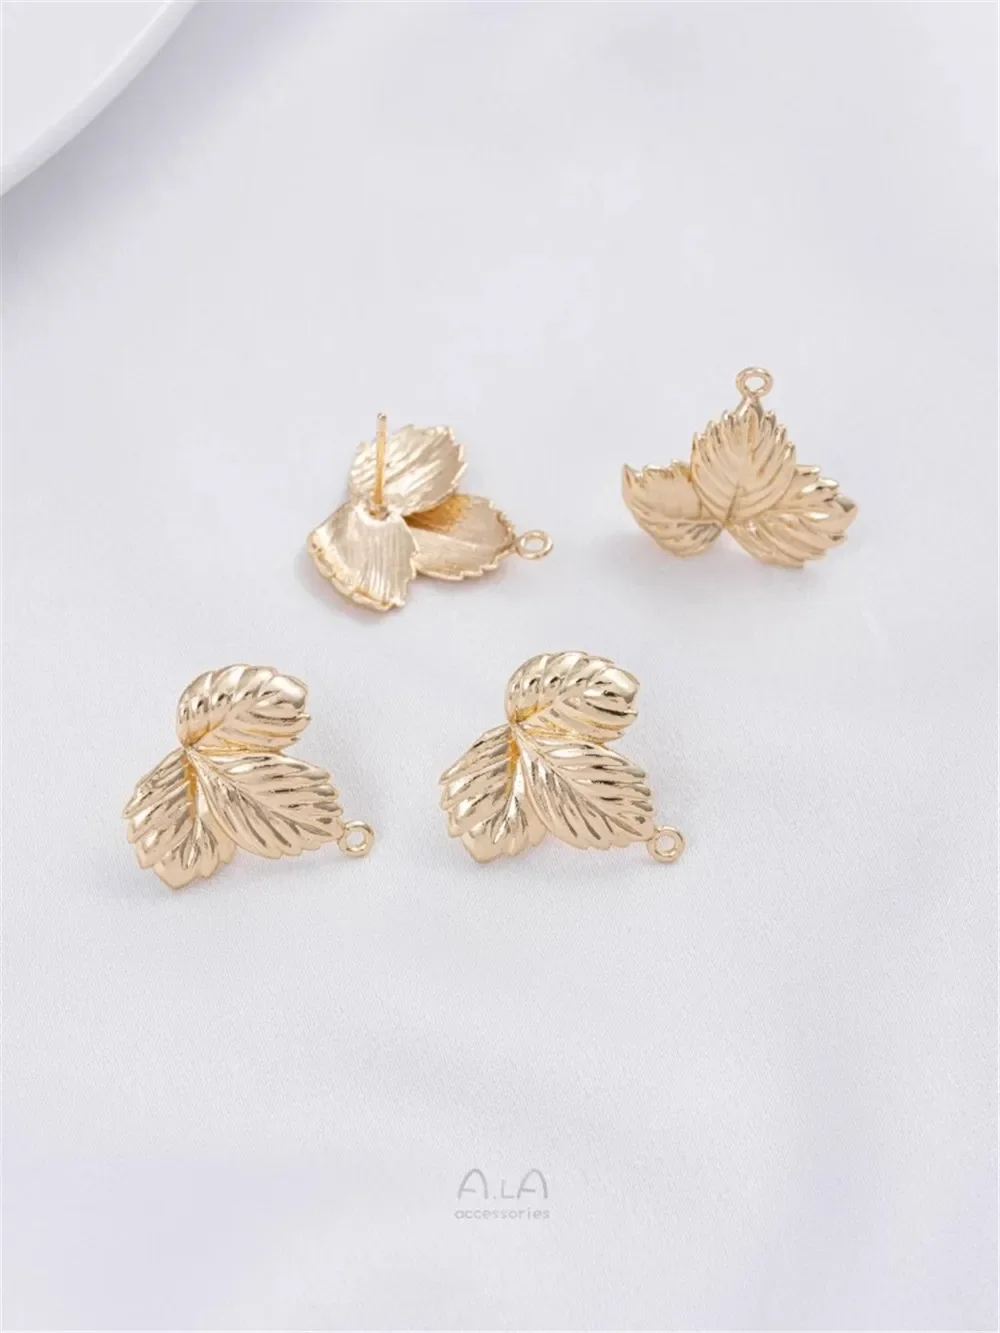 

14K Gold Wrapped with Hanging Rings, Leaf Earrings, 925 Silver Needles, Handcrafted Pearl Pendant Earrings, Ear Accessories E335